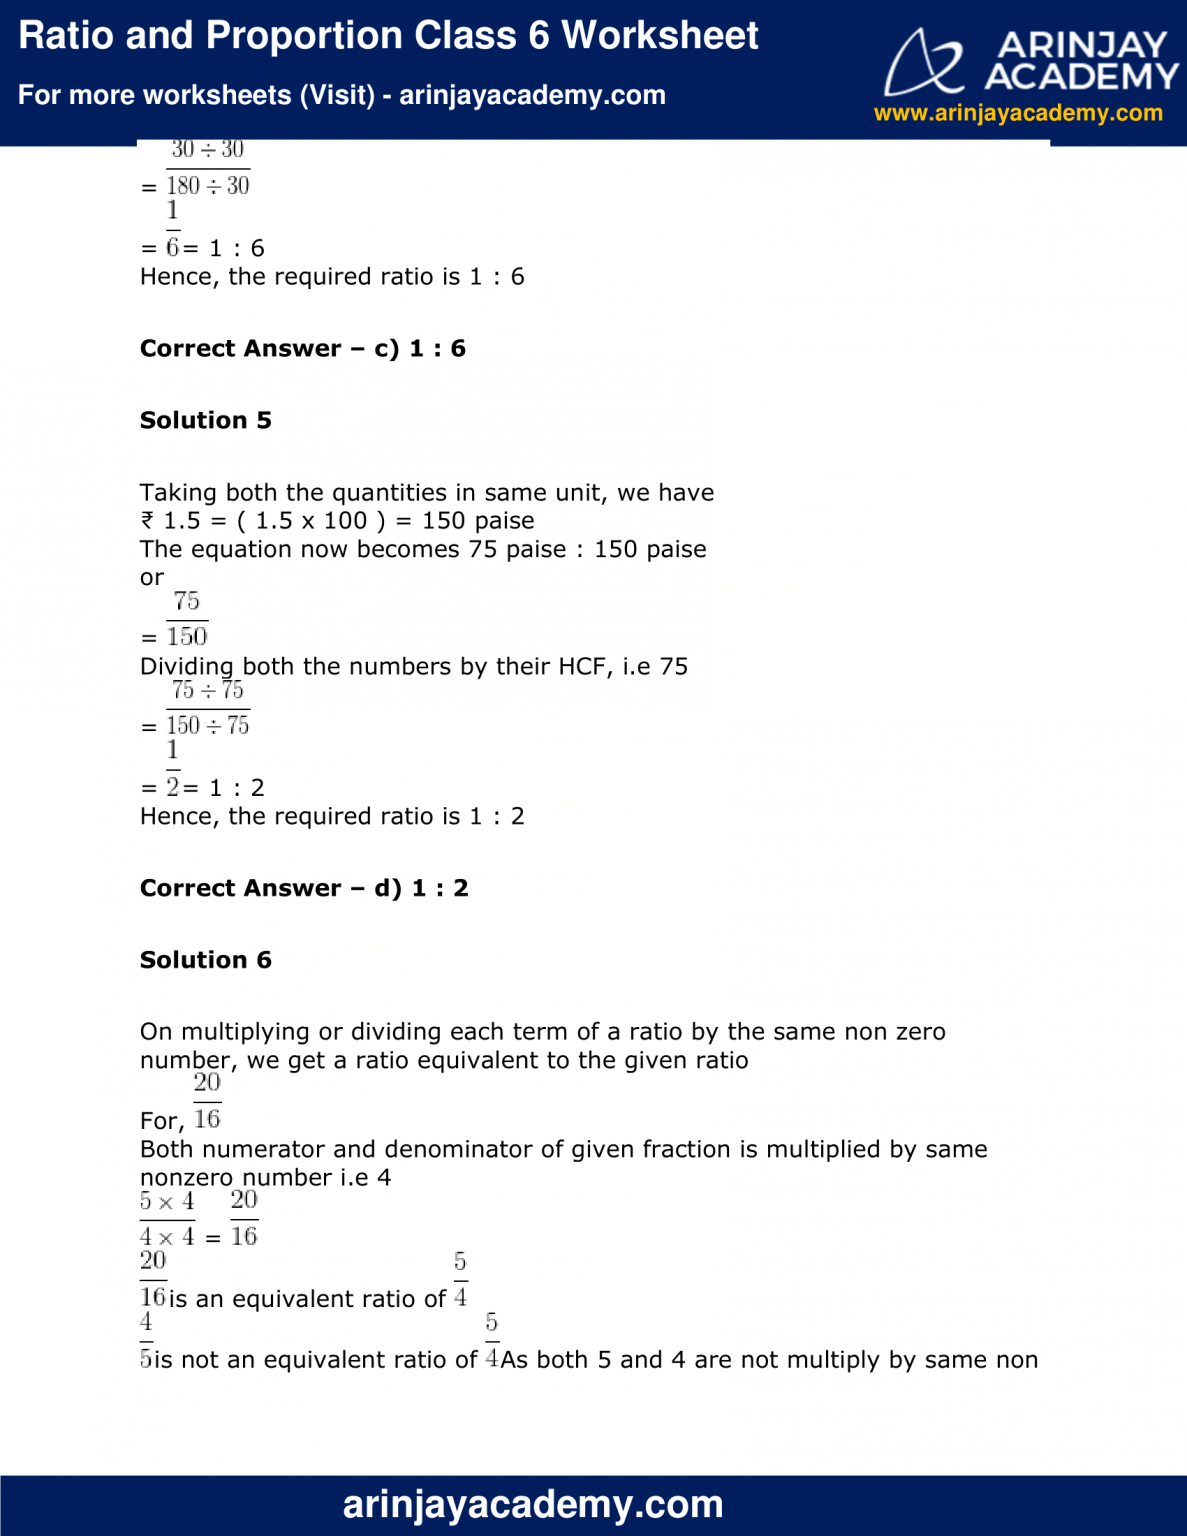 Ratio and Proportion Class 6 Worksheet - Arinjay Academy